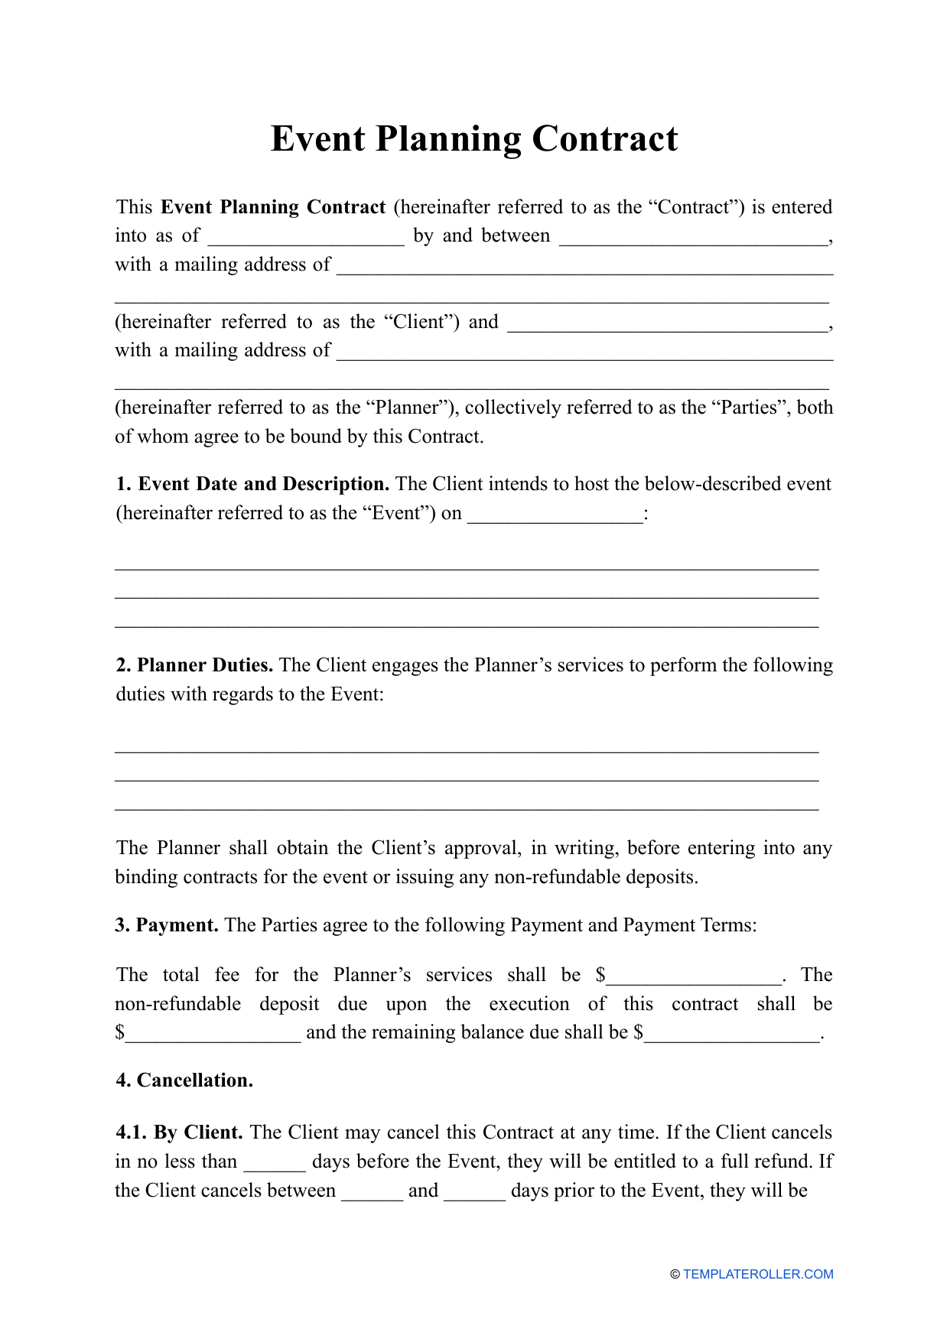 Event Planning Contract Template, Page 1